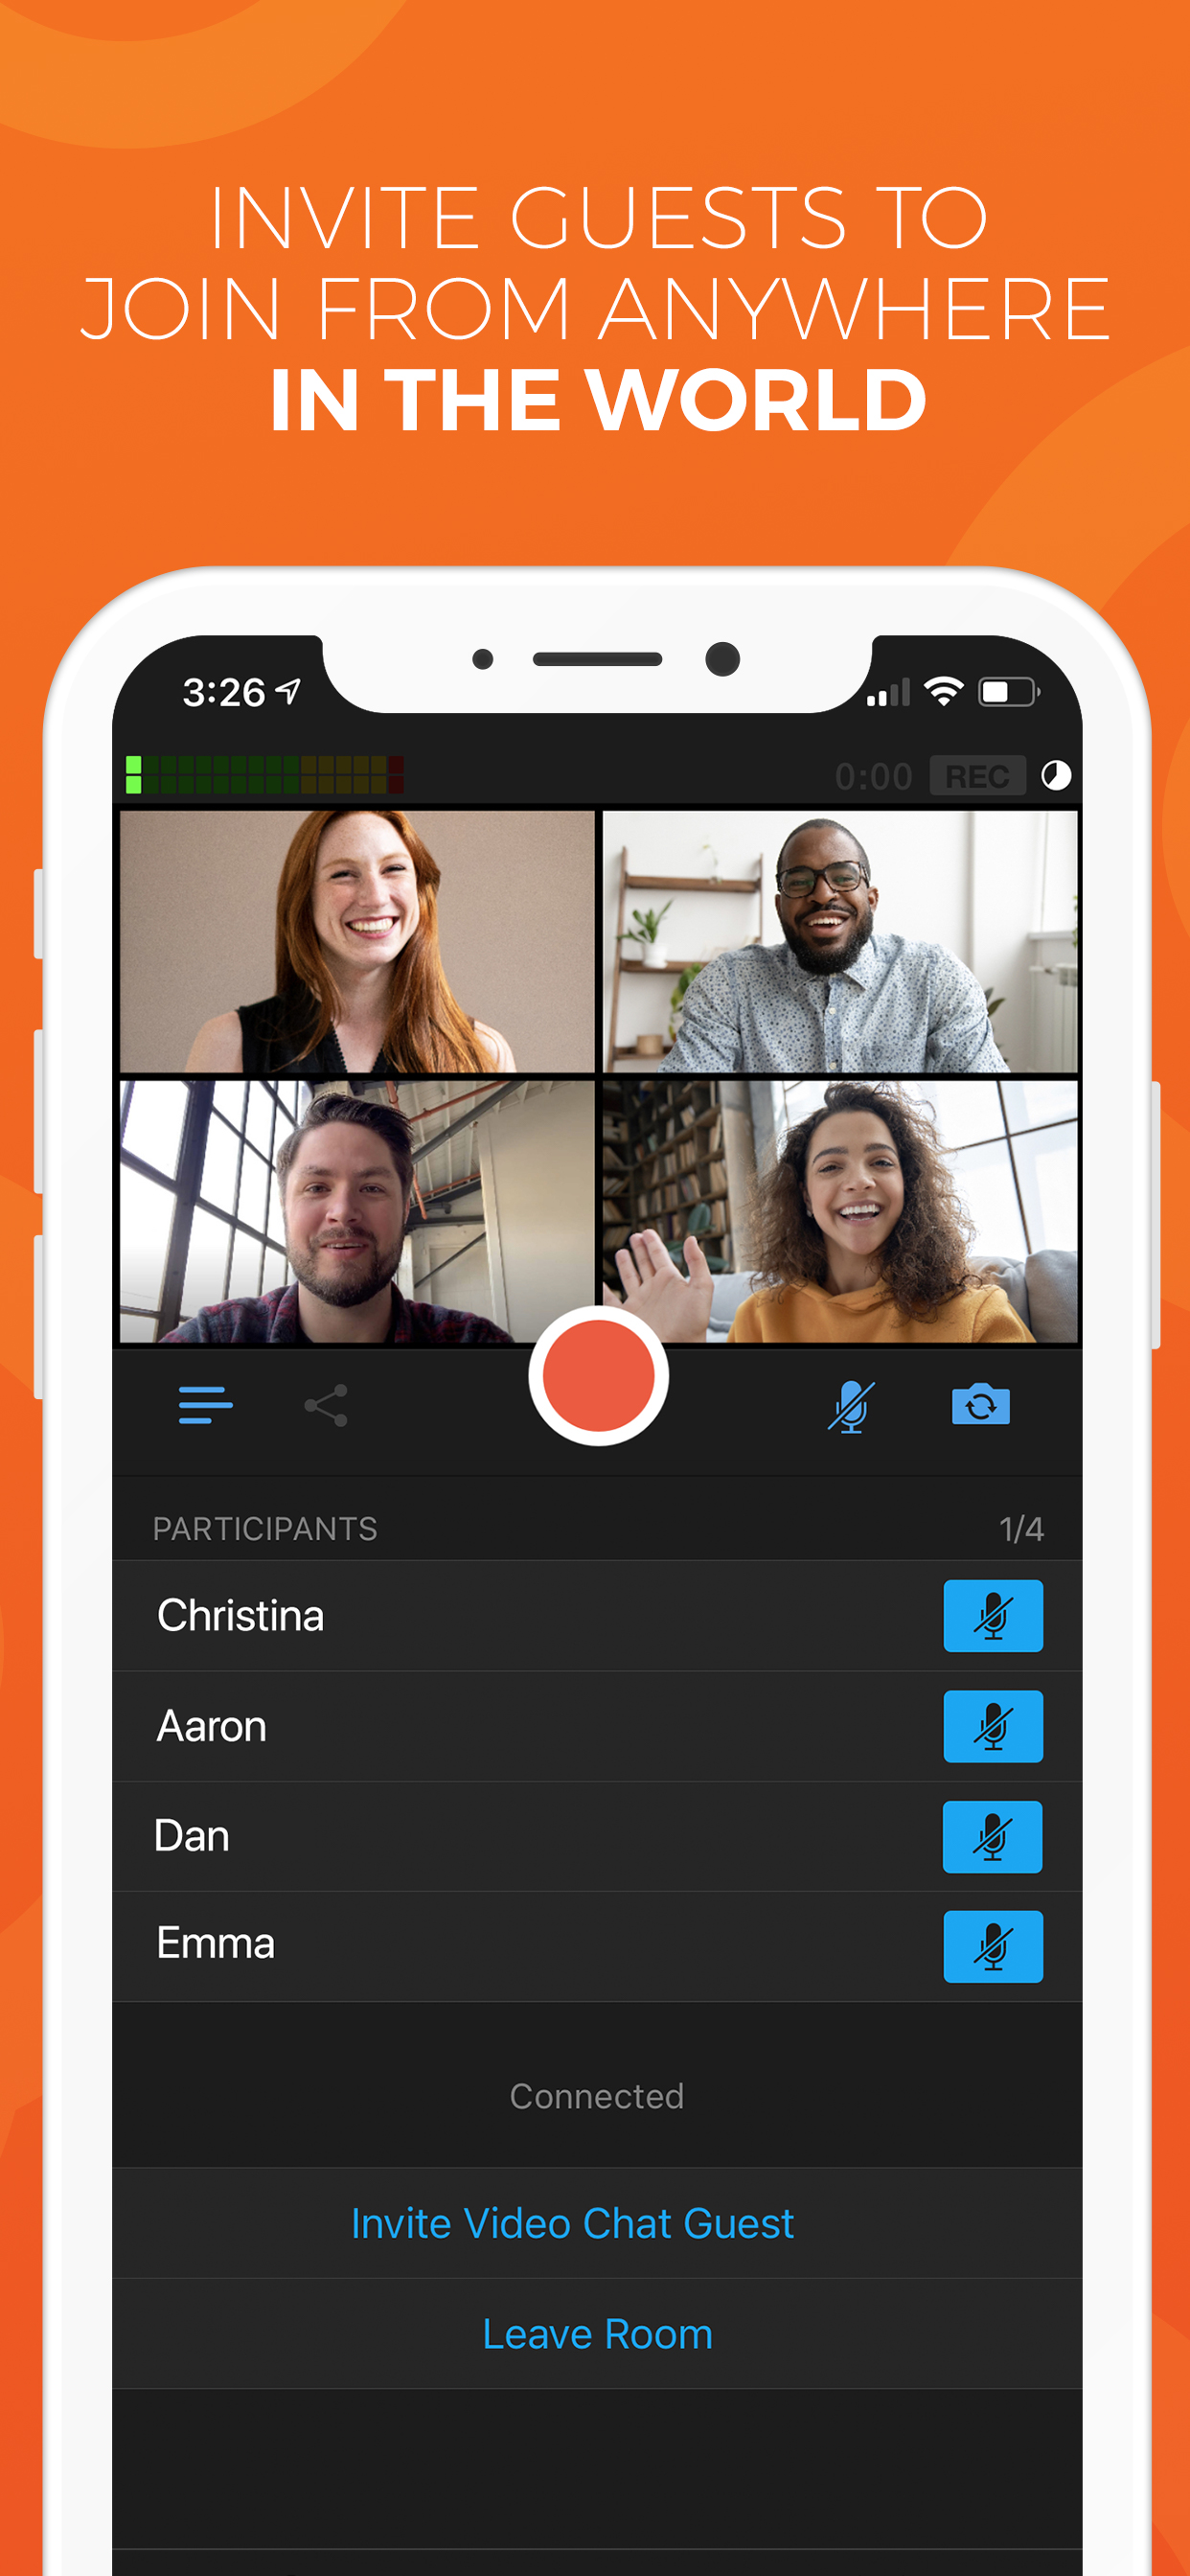 Bring in live video chat as a camera source for remote guests or locations!